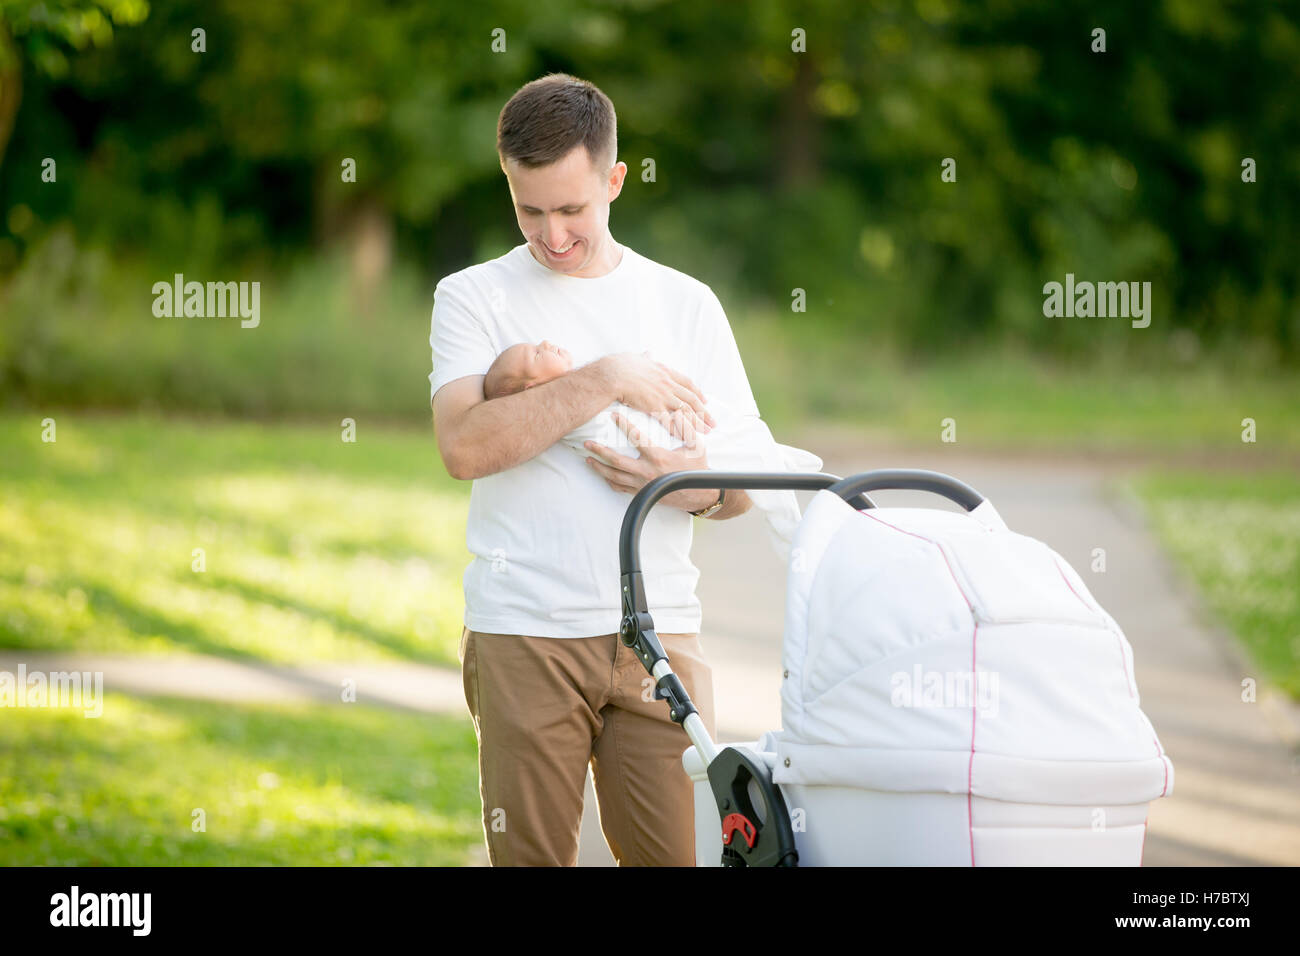 Young father holding his baby in park Stock Photo